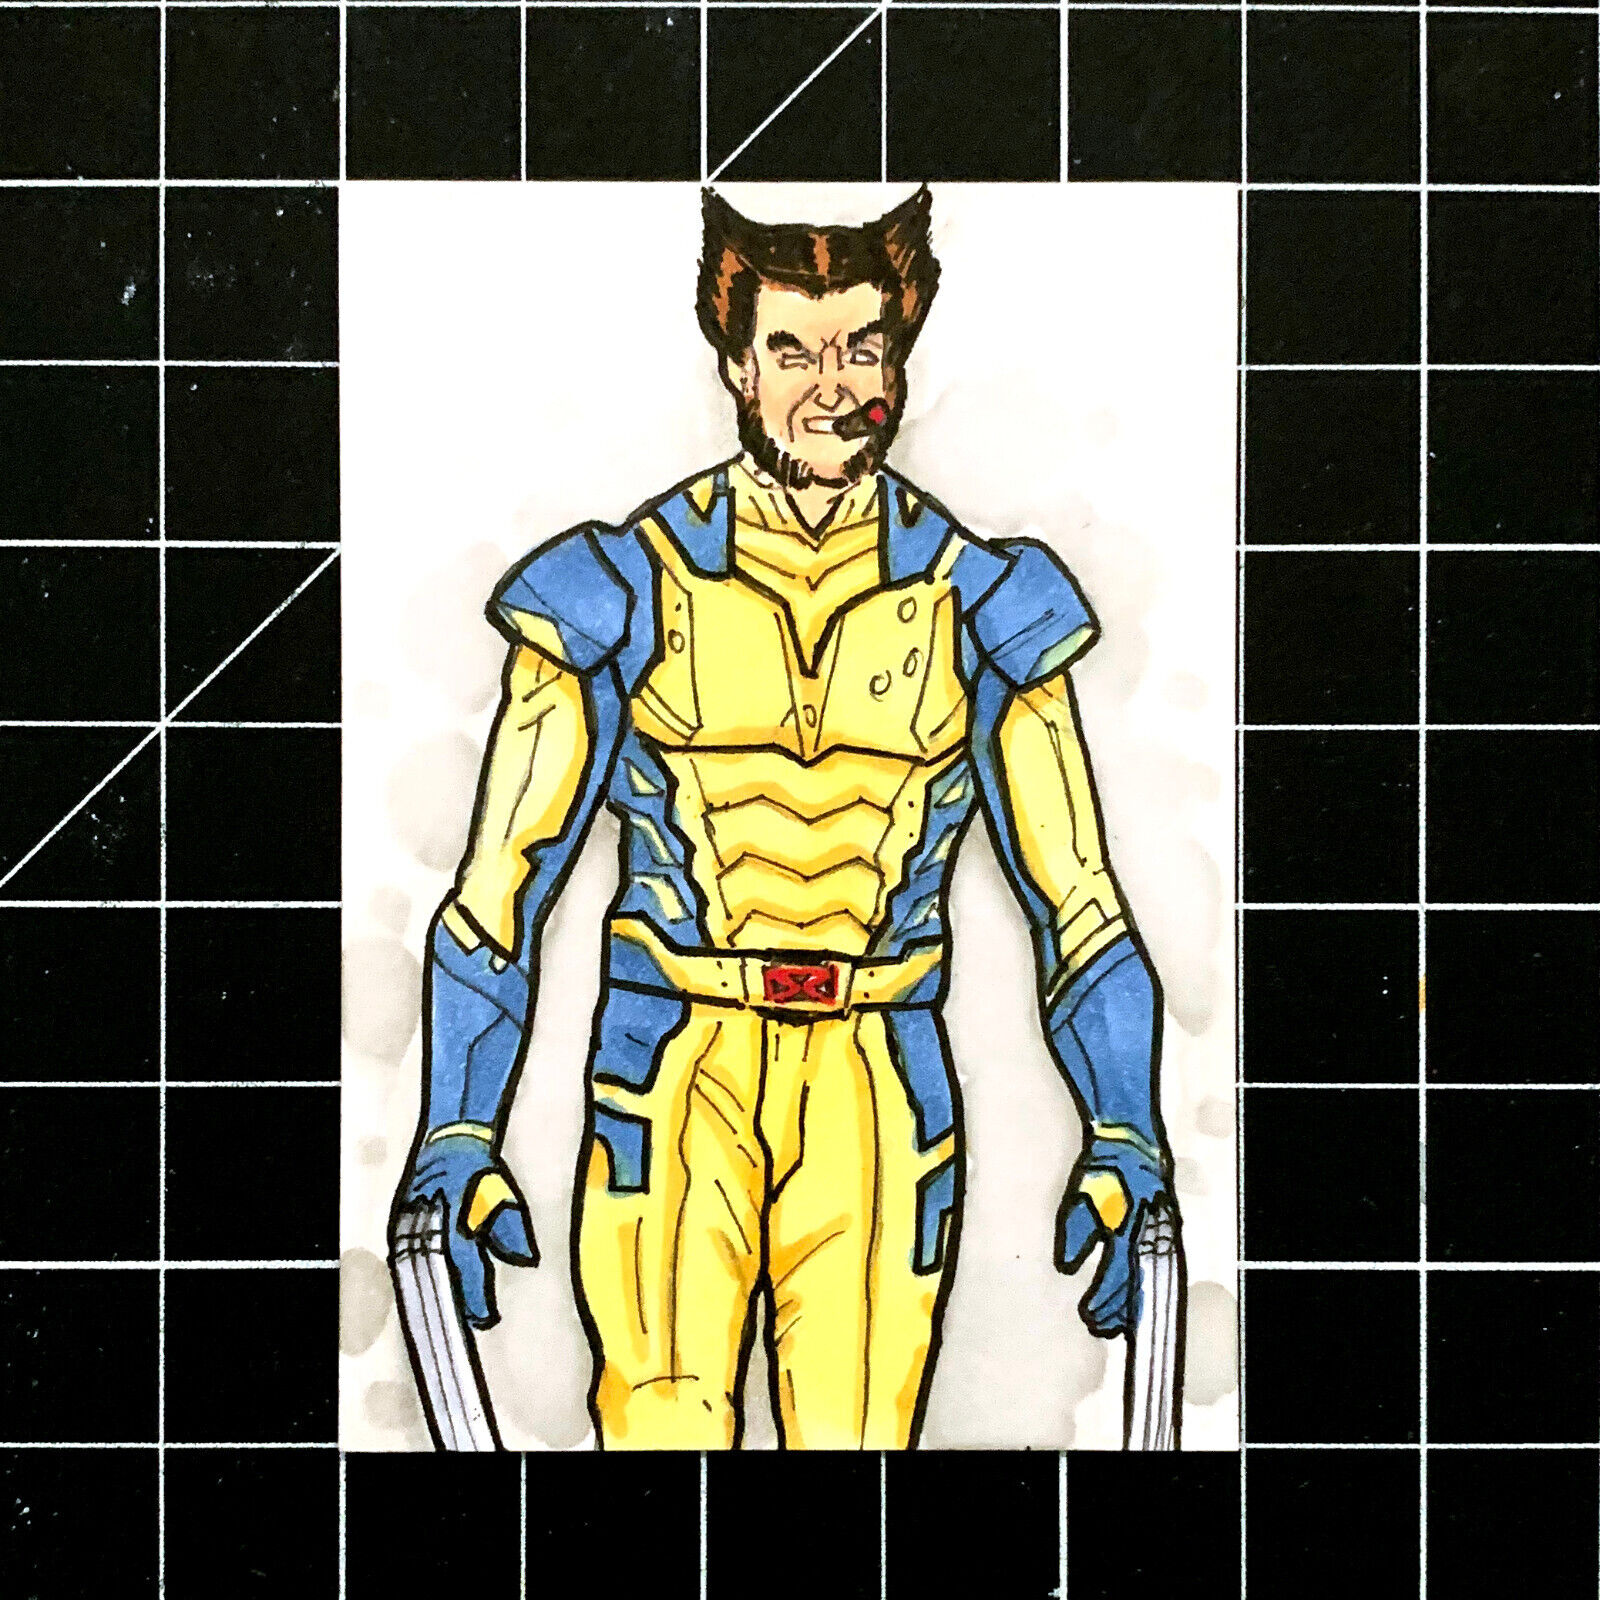 1 of 1 Extremely Rare Sketch Card of X-Men's Wolverine Deadpool 3 Costume Hot